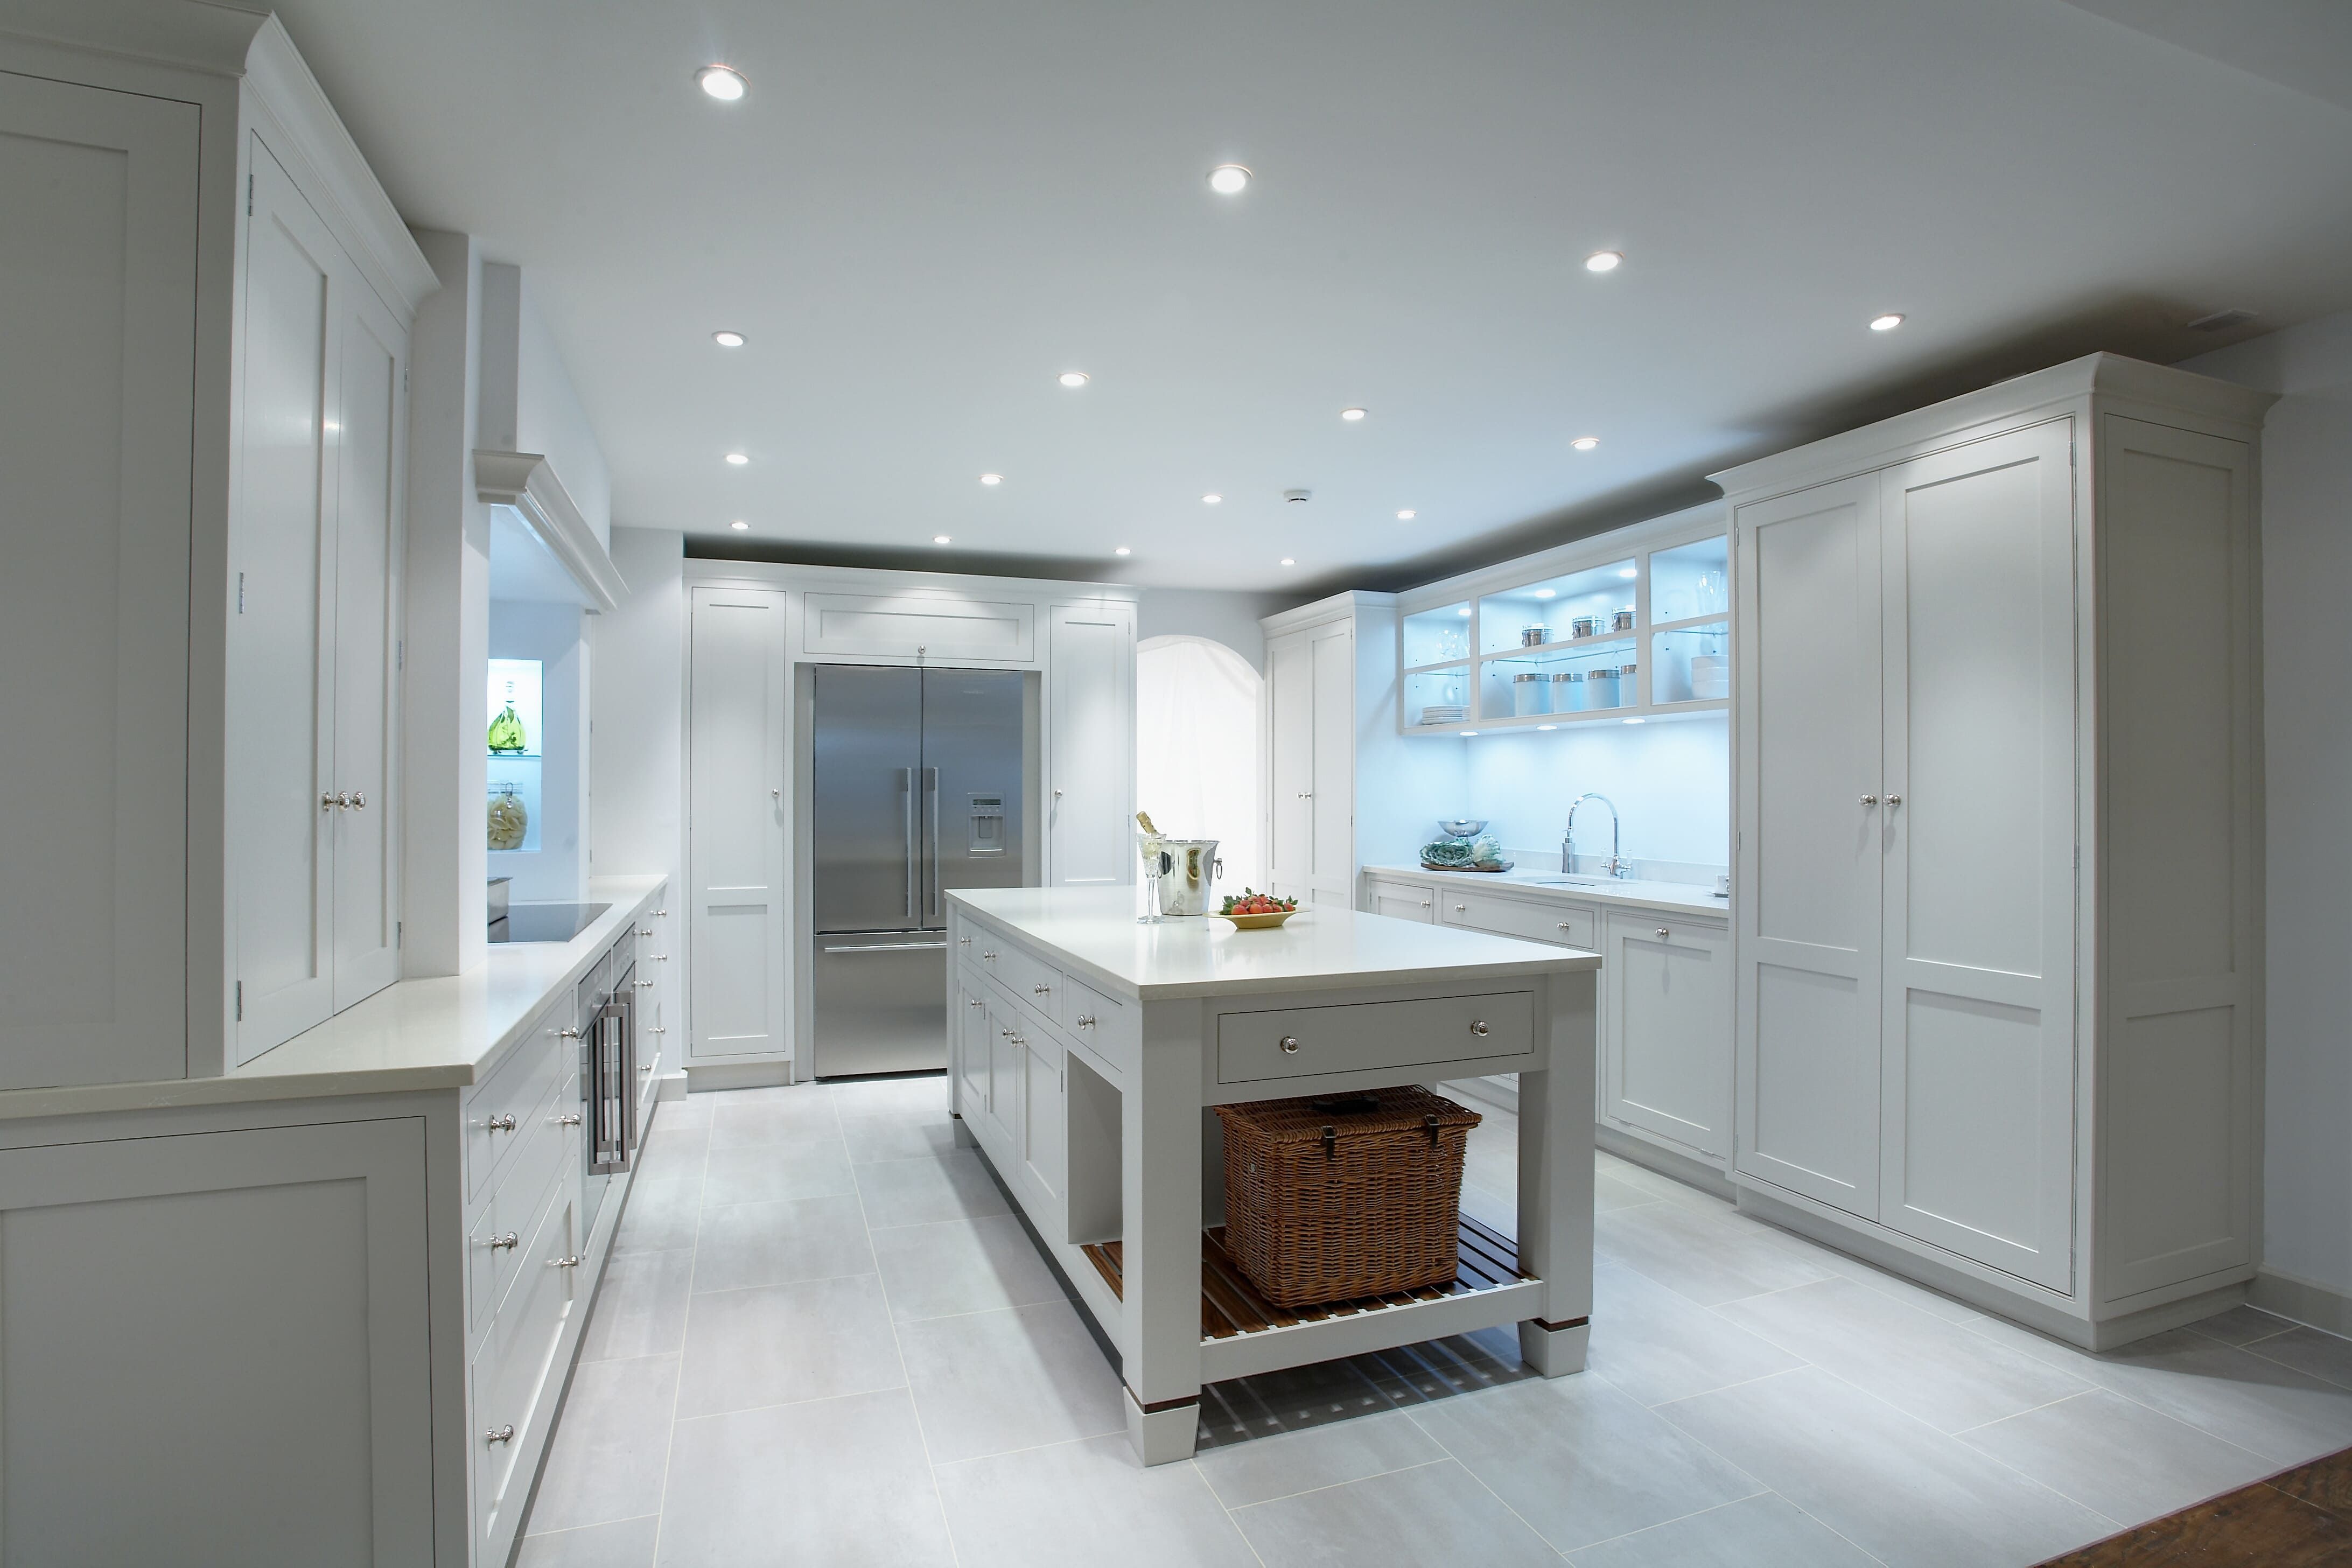 A large, light-grey bespoke kitchen and island is bathed in a cool light from a series of built-in overhead spot lights. A large fridge-freezer can be seen set in to a cabinet on the back wall.